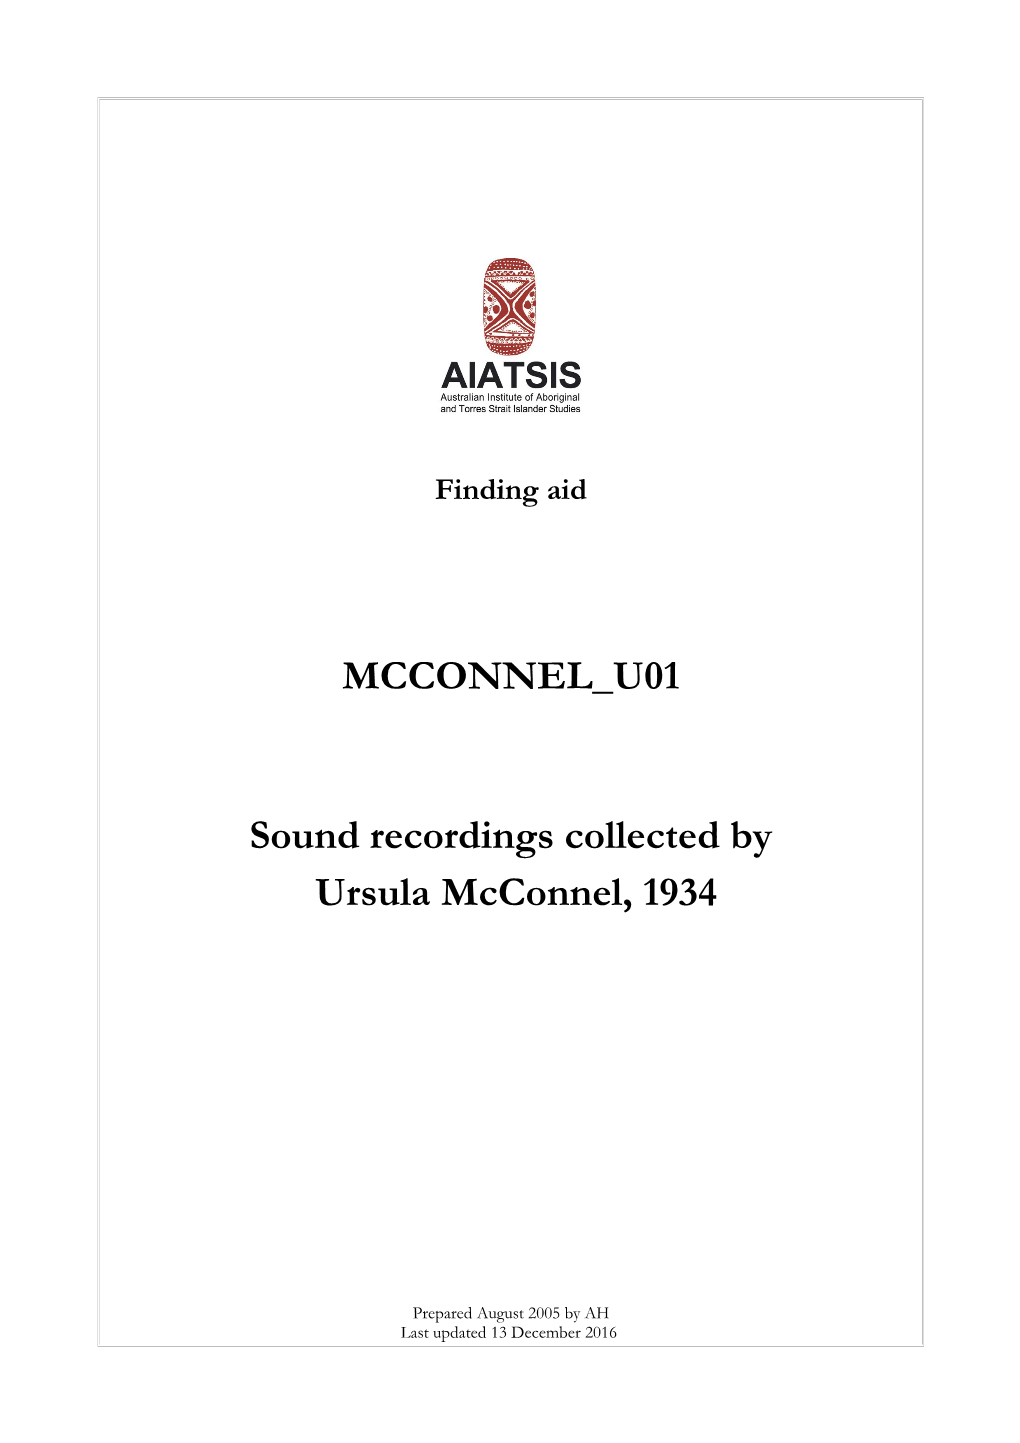 Guide to Sound Recordings Collected by Ursula Mcconnel